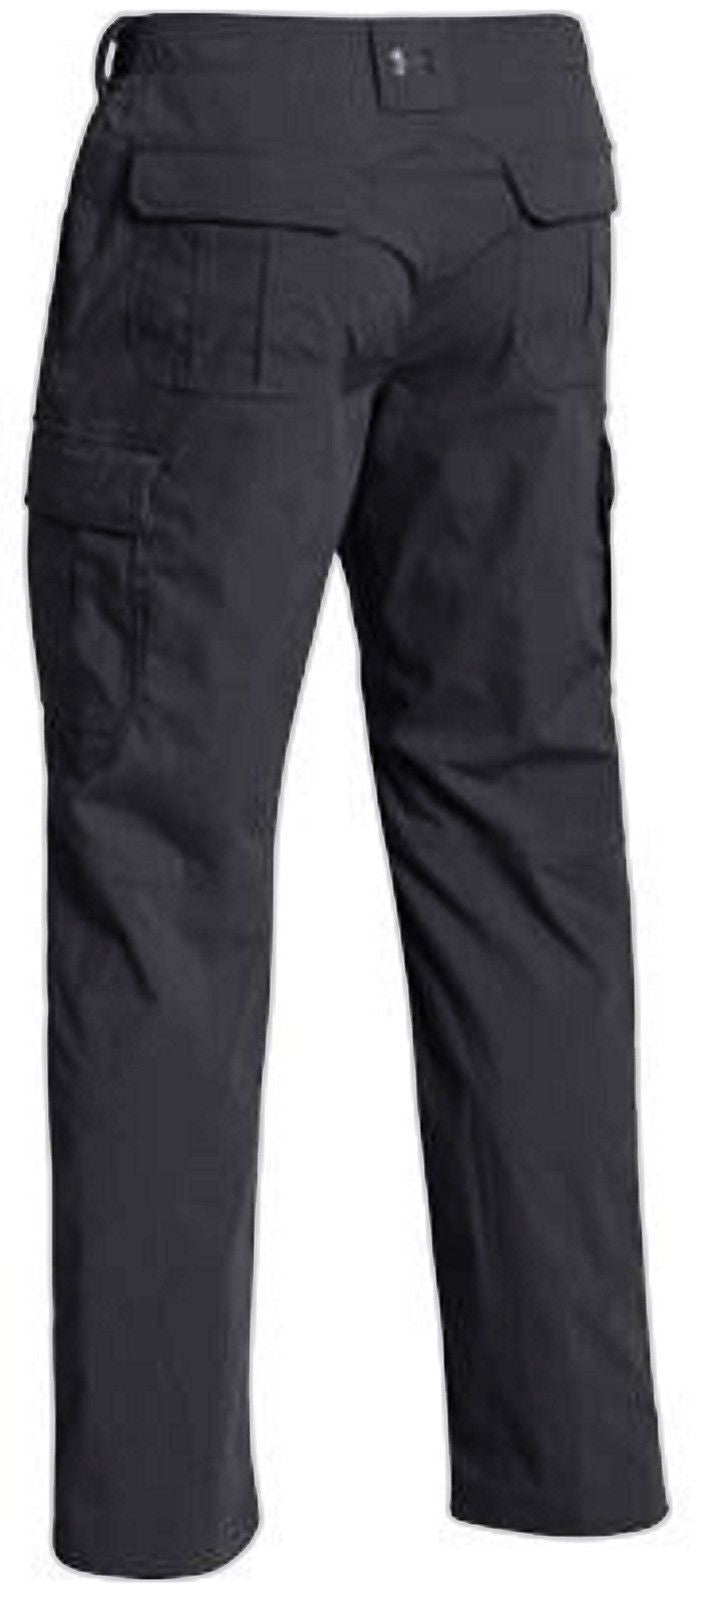 Under Armour Tactical Patrol Pants II - Conceal Carry Field Duty Cargo Pants